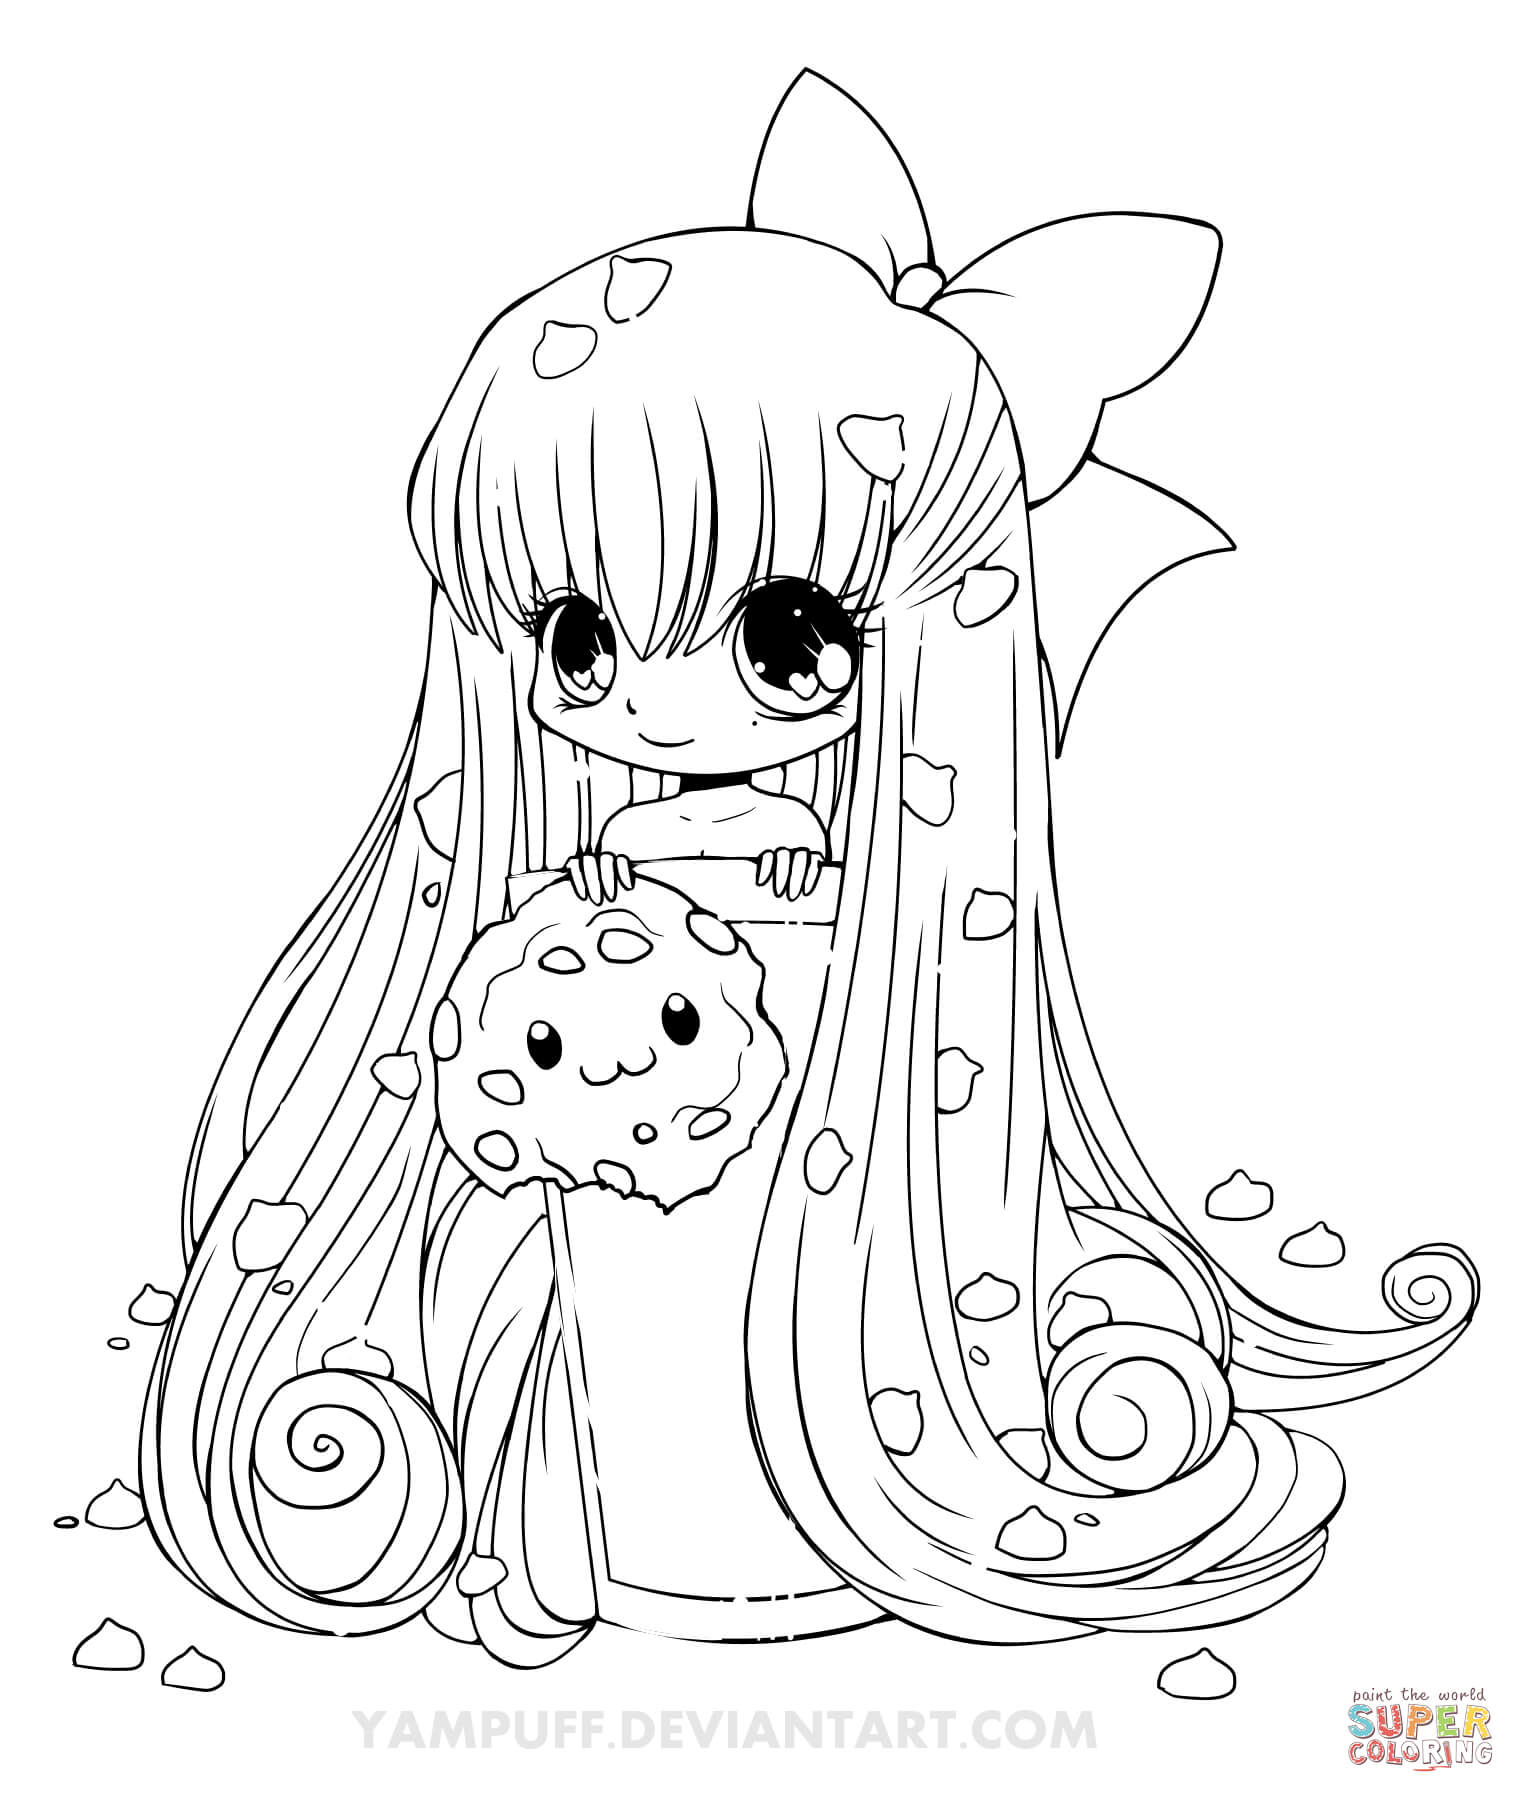 Chibi Cookie Girl coloring page | Free Printable Coloring Pages